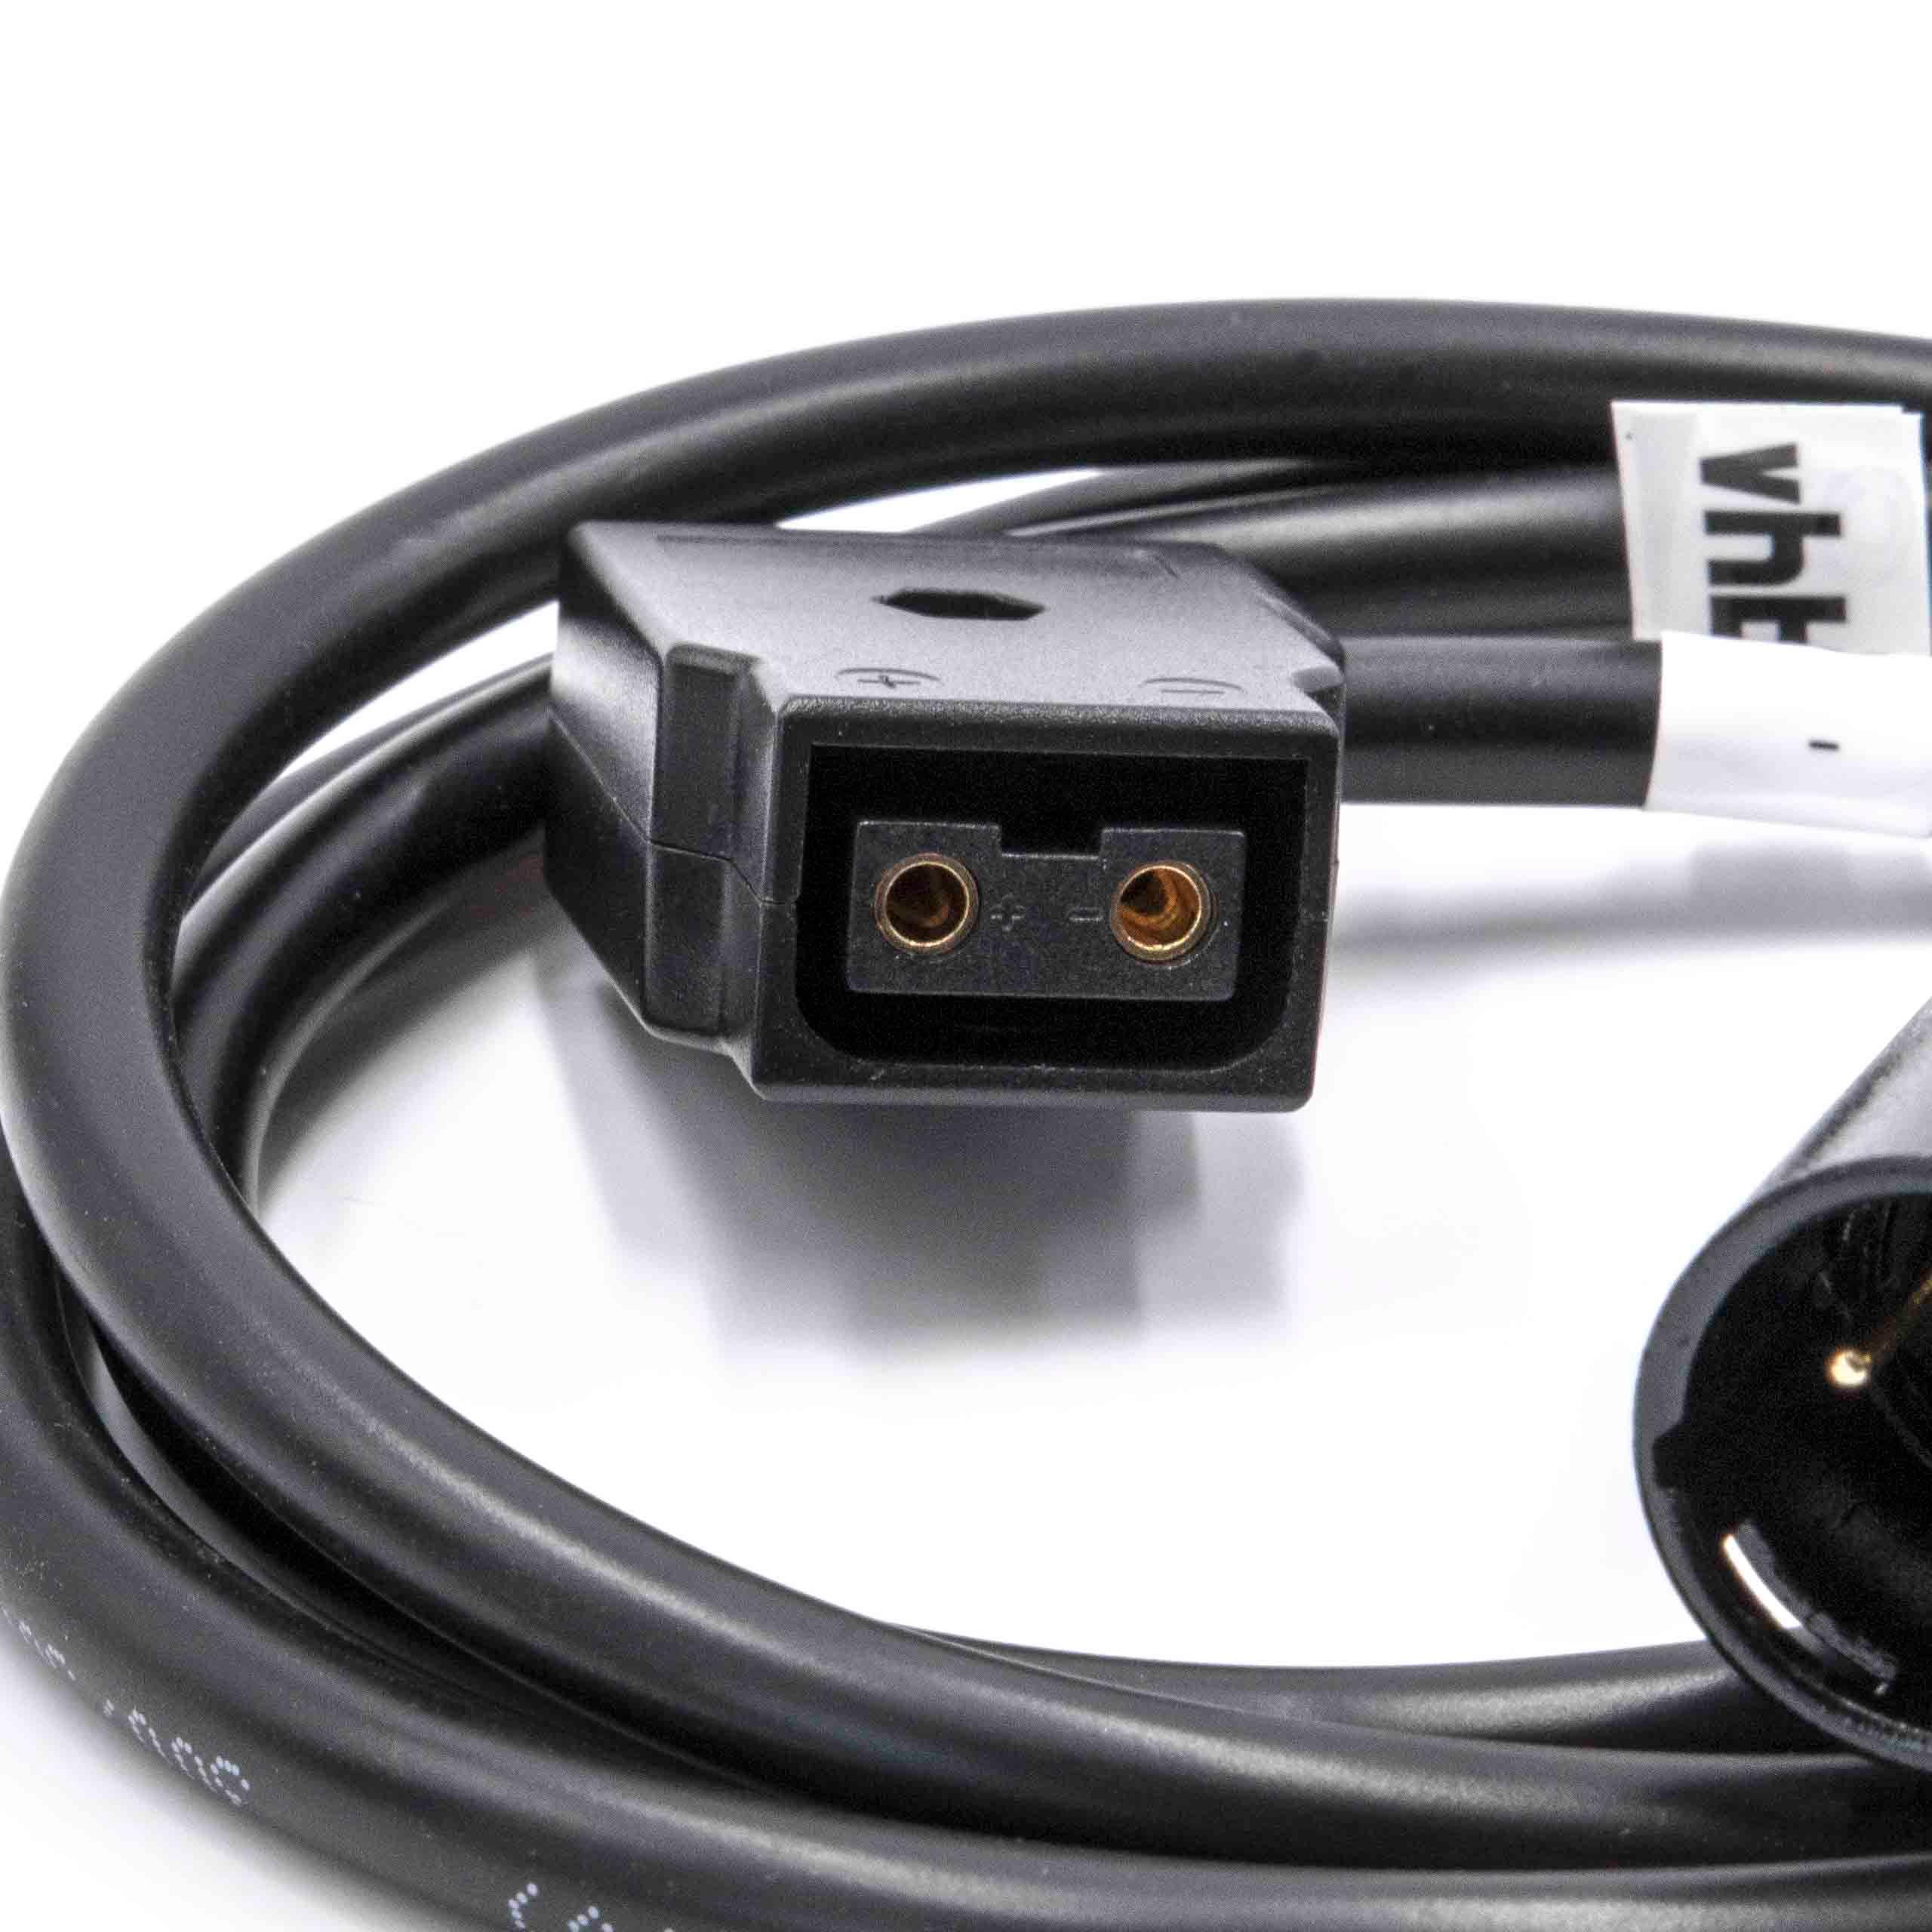 Adapter Cable D-Tap (female) to XLR 4-Pin (m) suitable for 602, 1303, LVM-170A, PMW-F55 Practilite Camera etc.